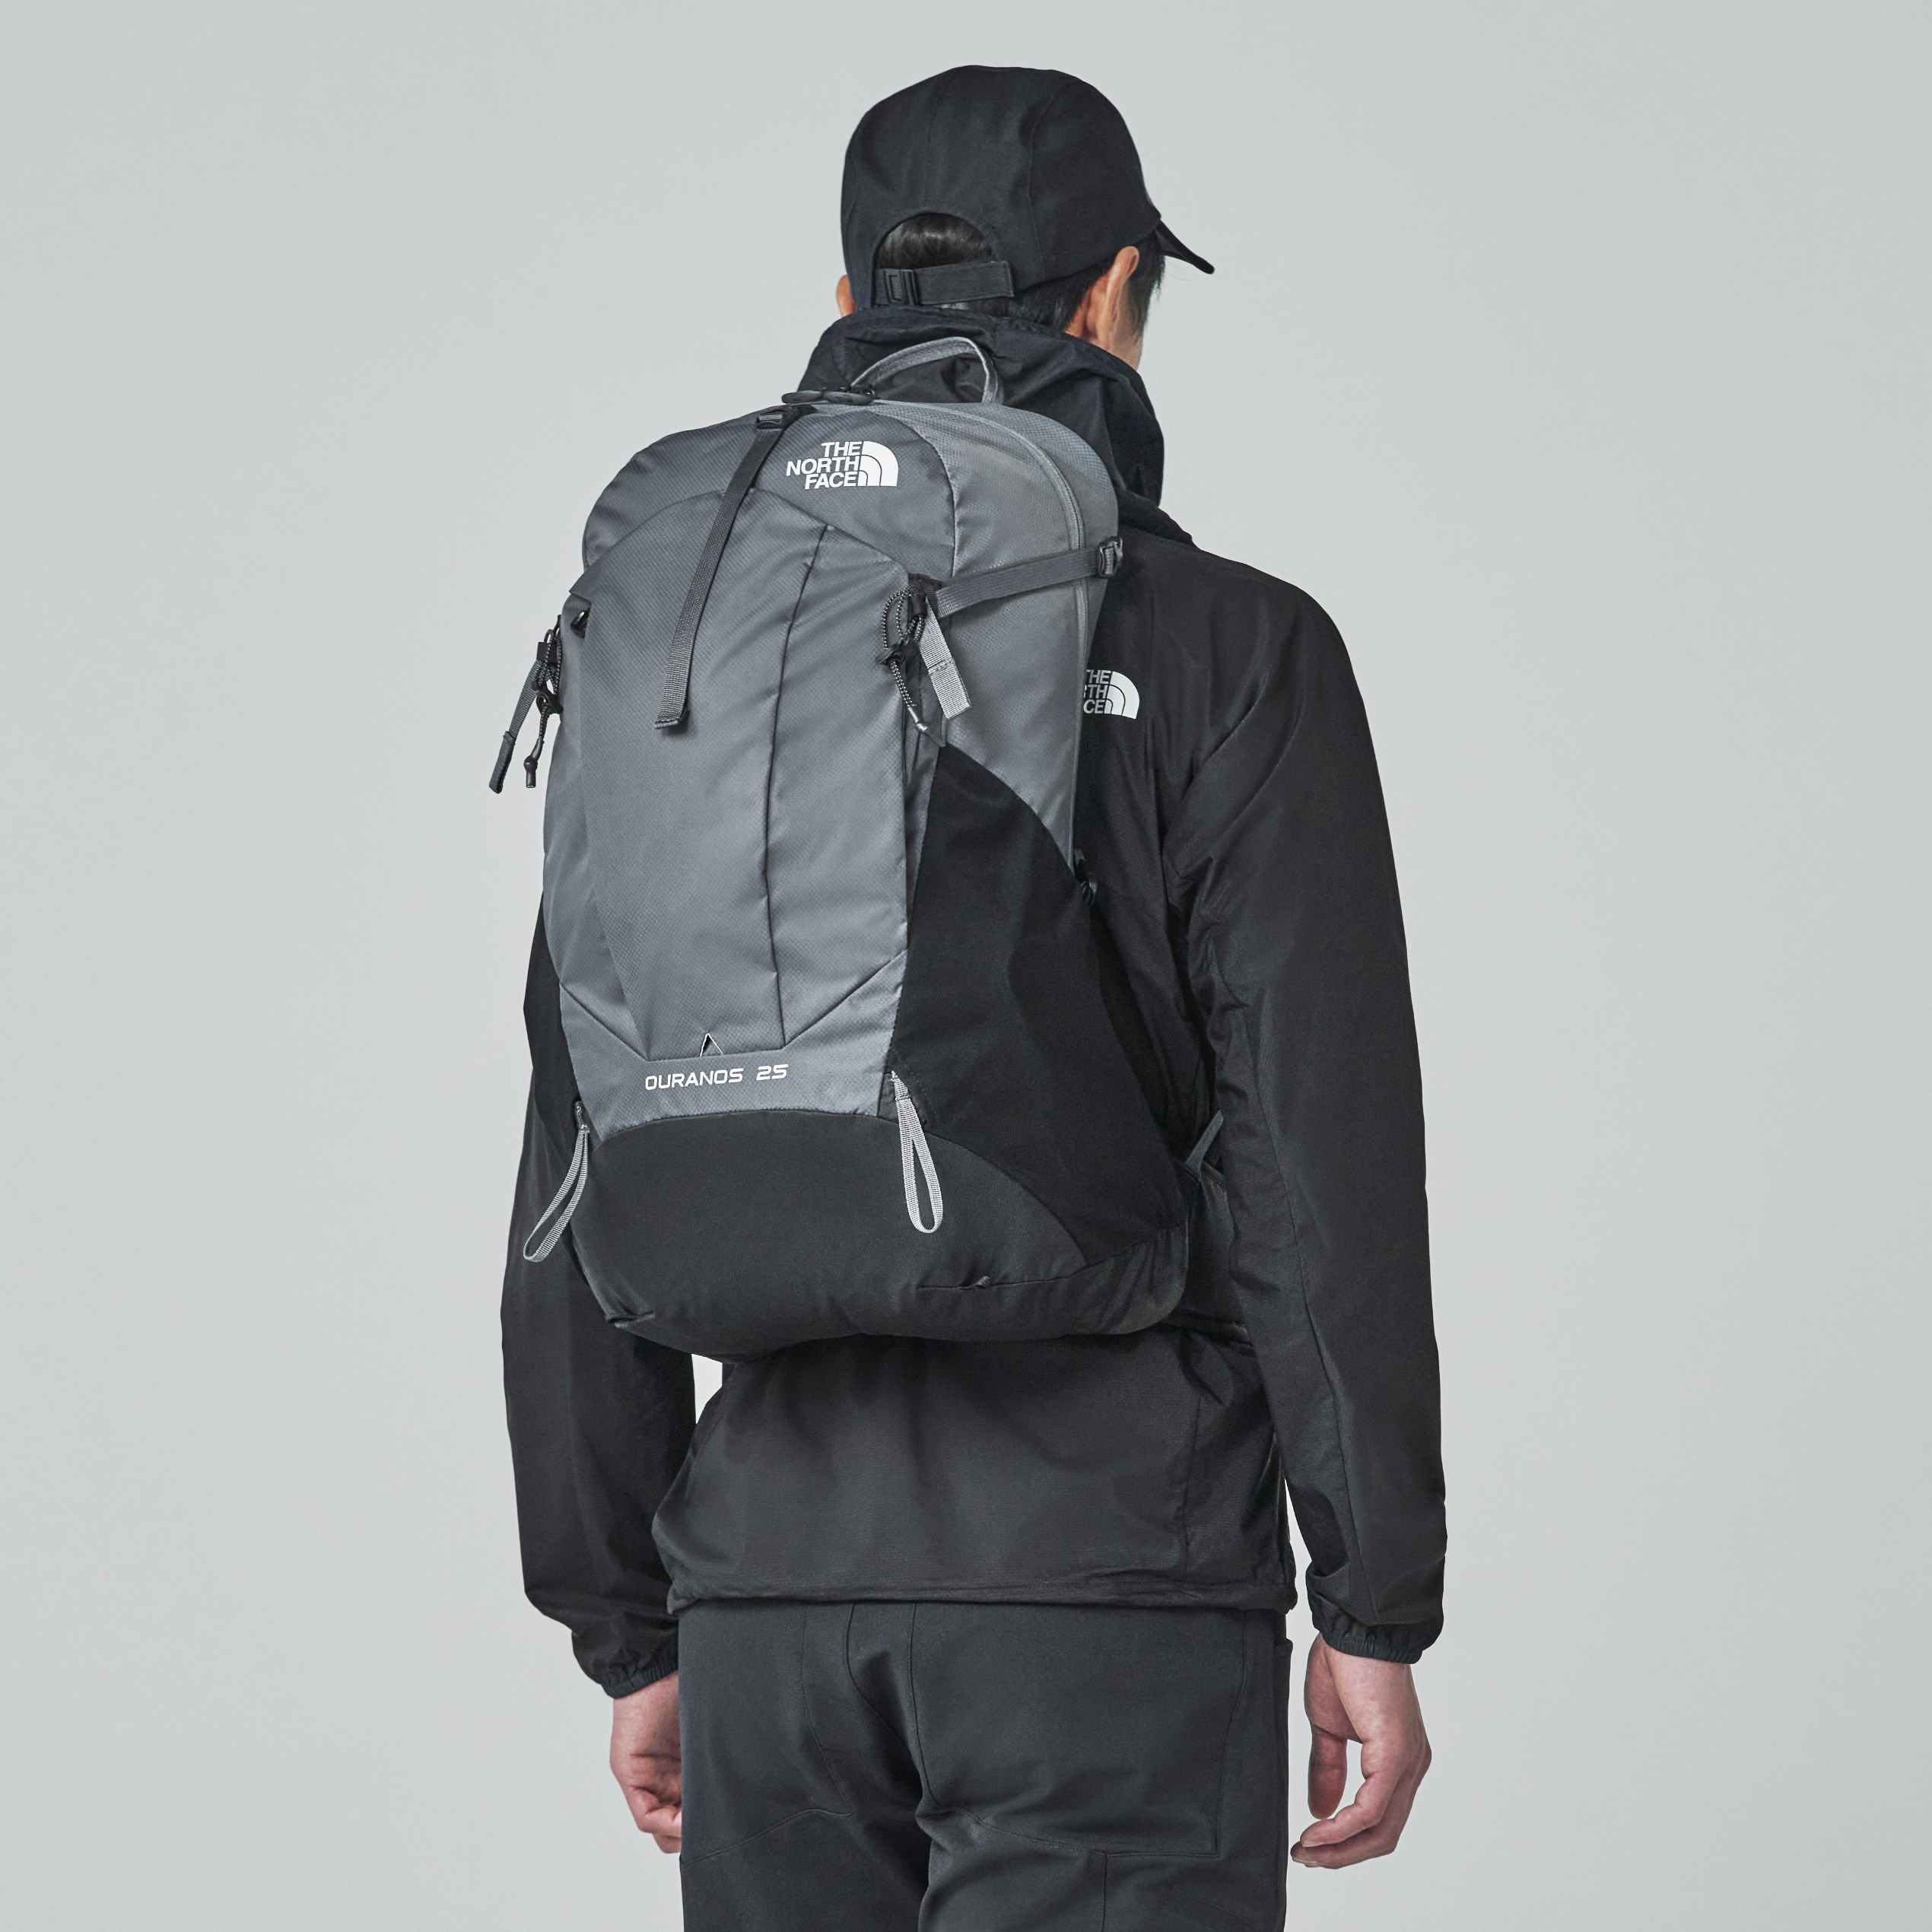 THE NORTH FACE OURANOS 25